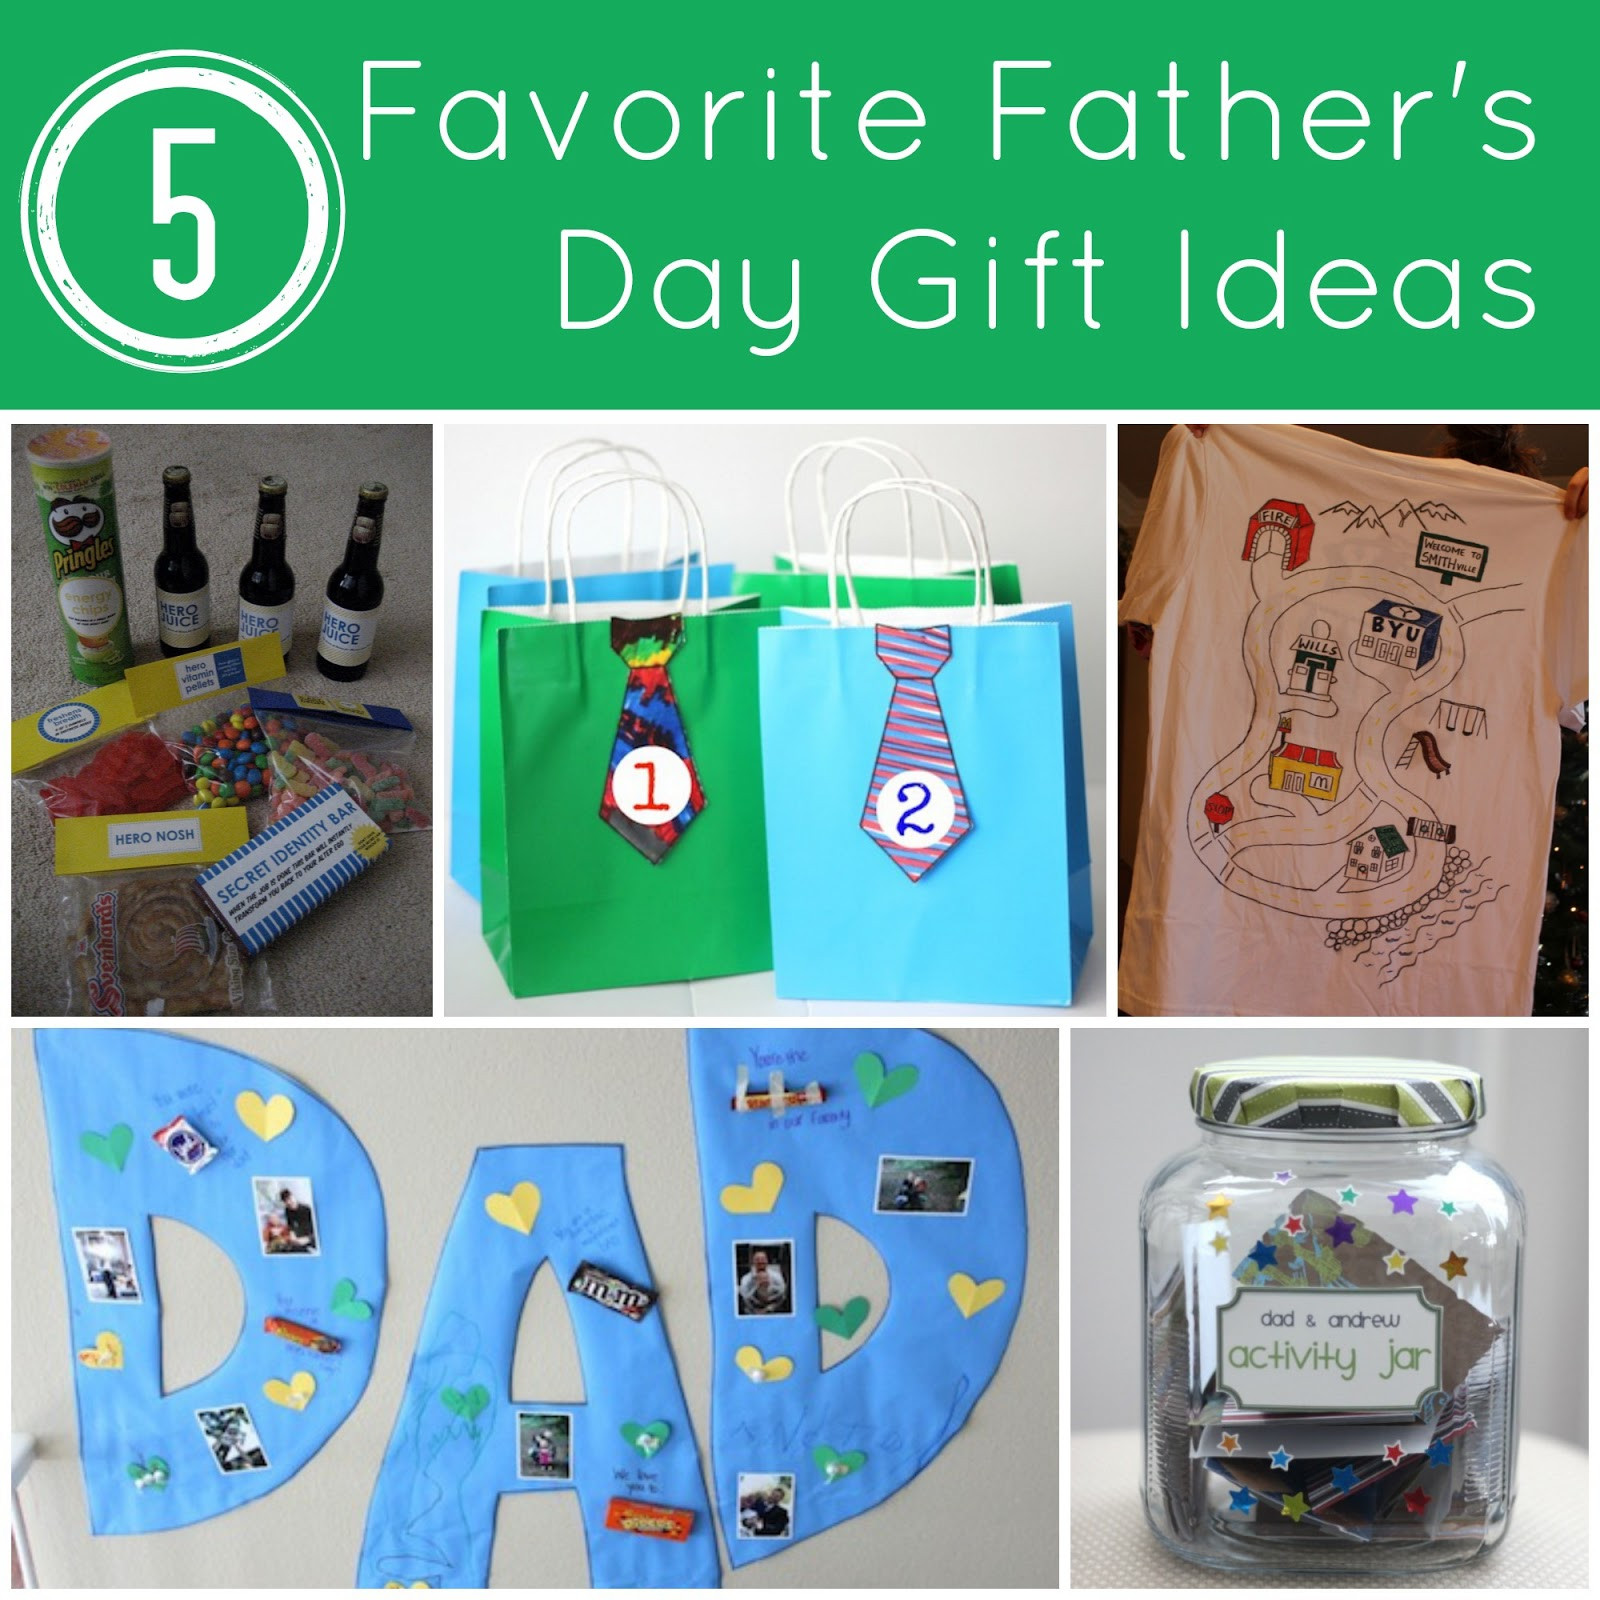 Walmart Fathers Day Gift Ideas
 Toddler Approved 5 Favorite Father s Day Gift Ideas